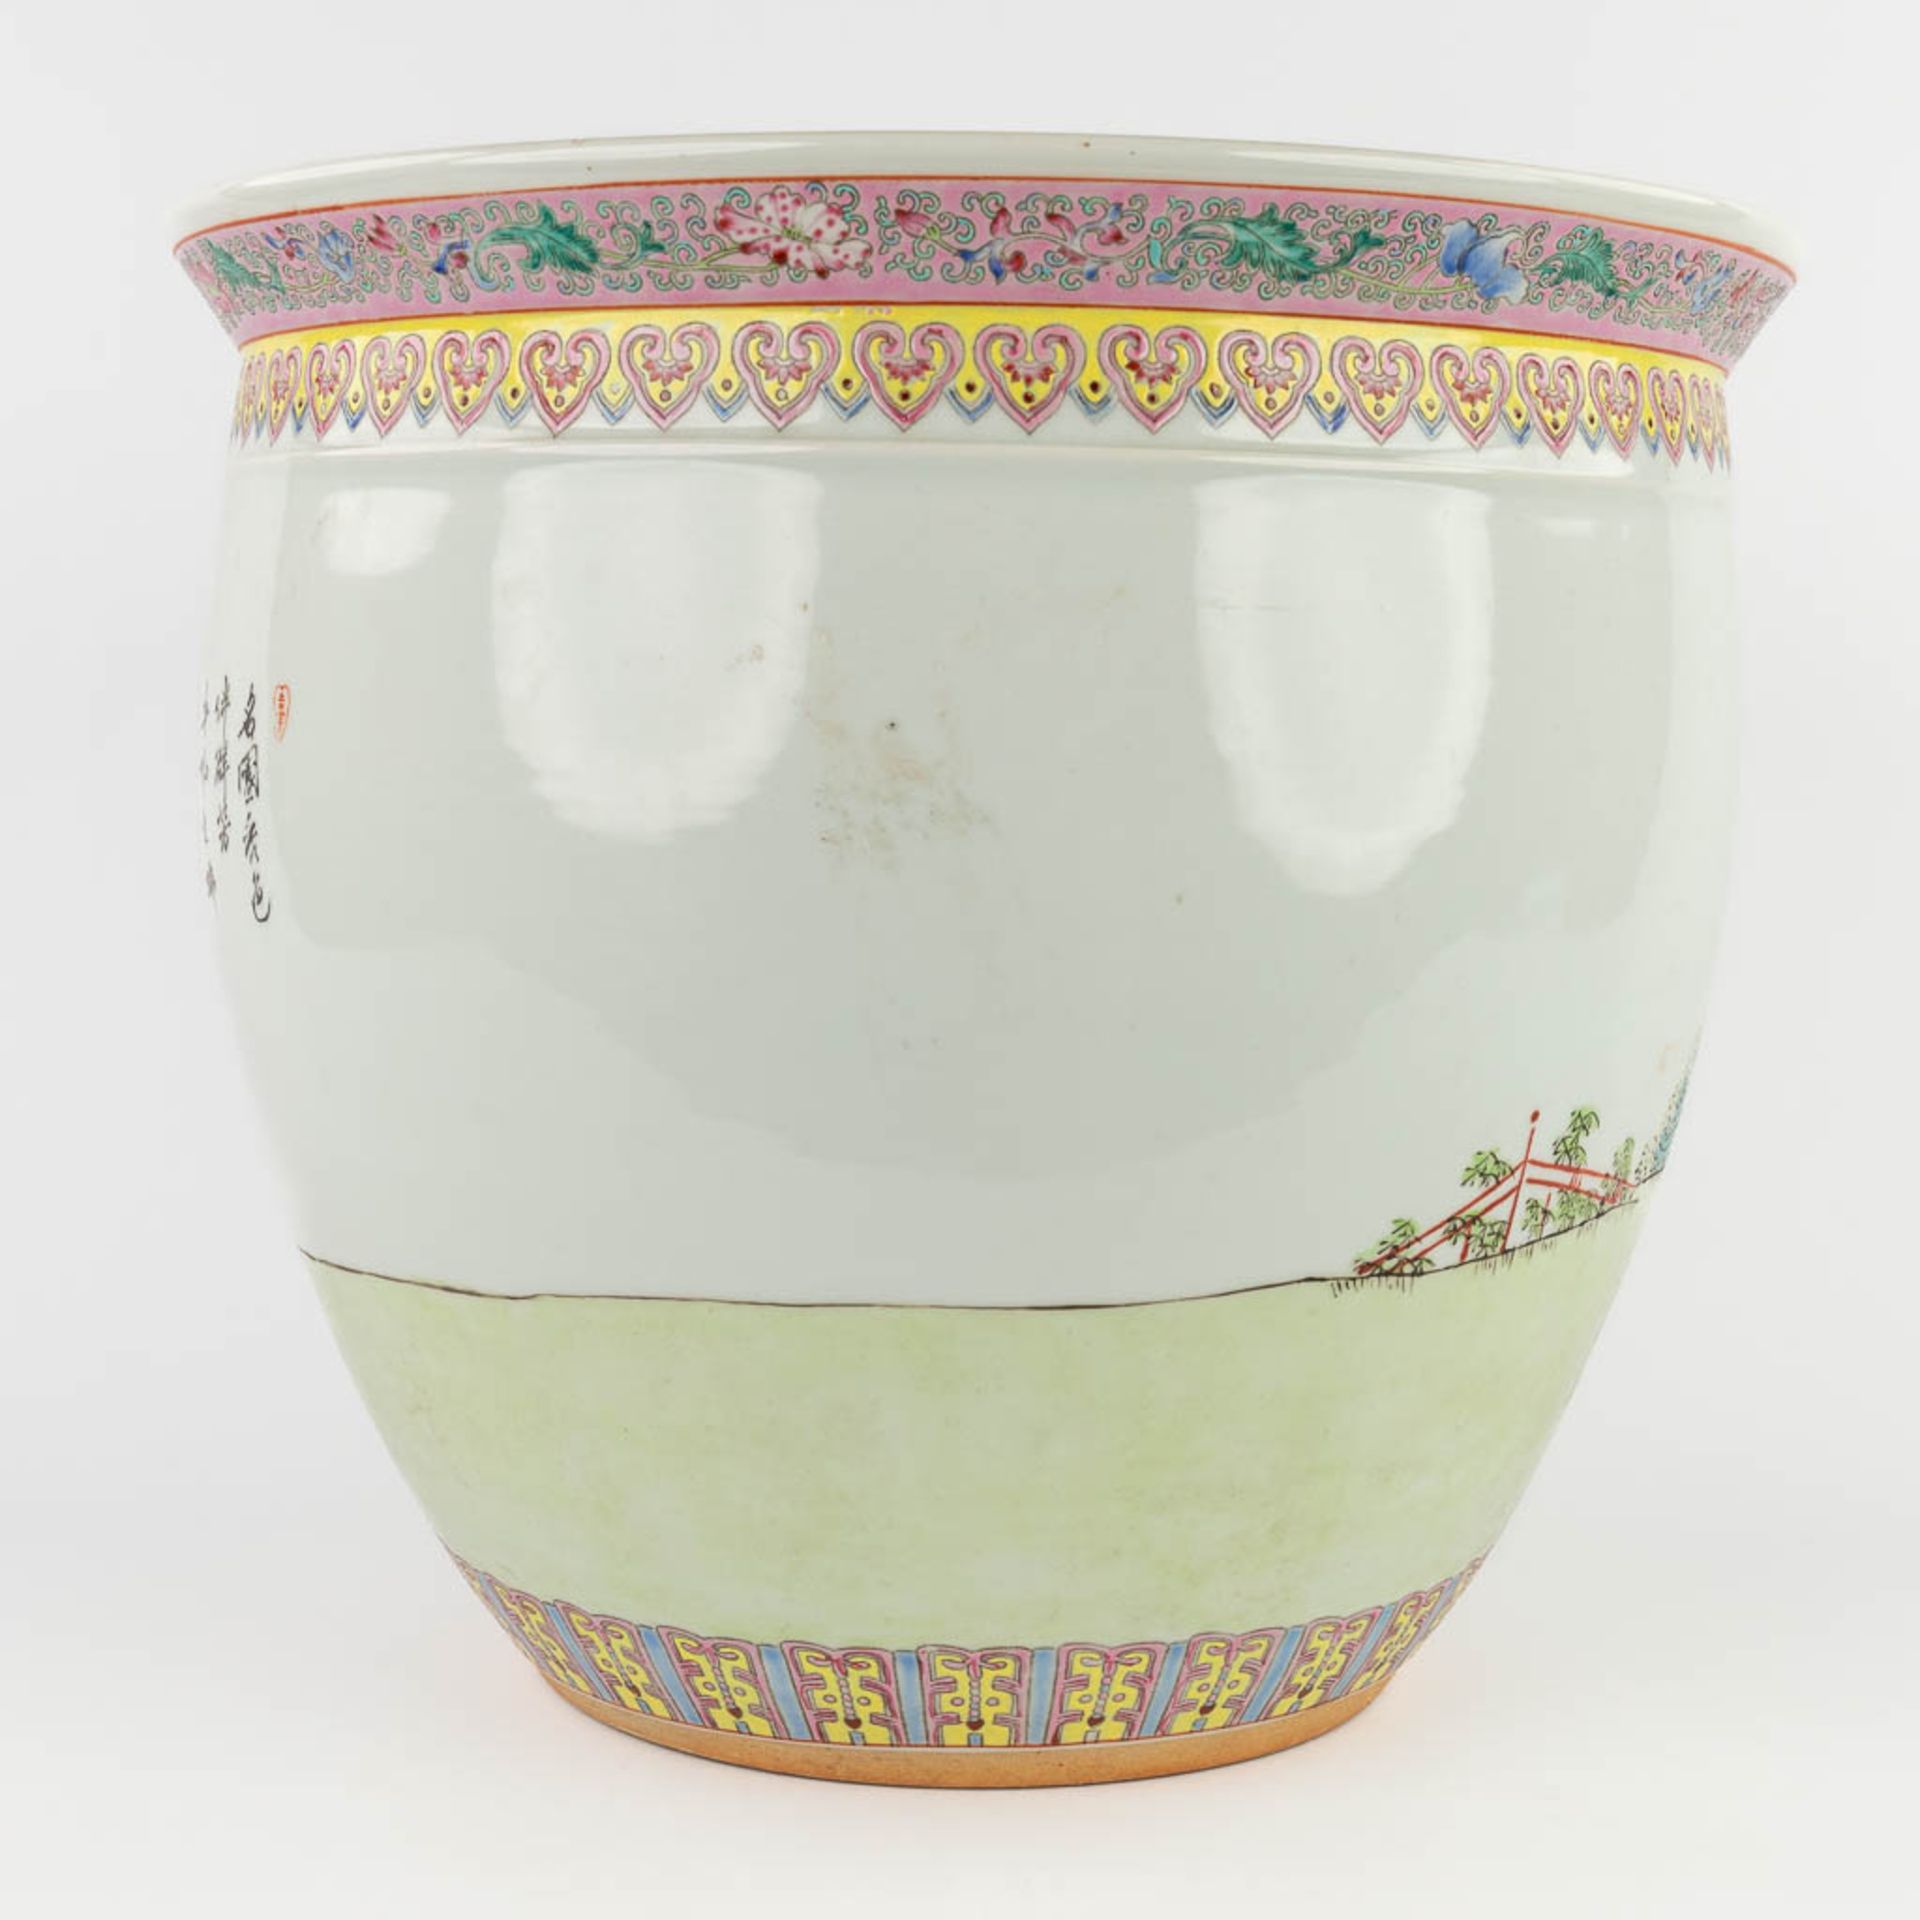 A large Chinese cache-pot decorated with figurines in a garden. 20th C. (H:36 x D:40 cm) - Image 5 of 13